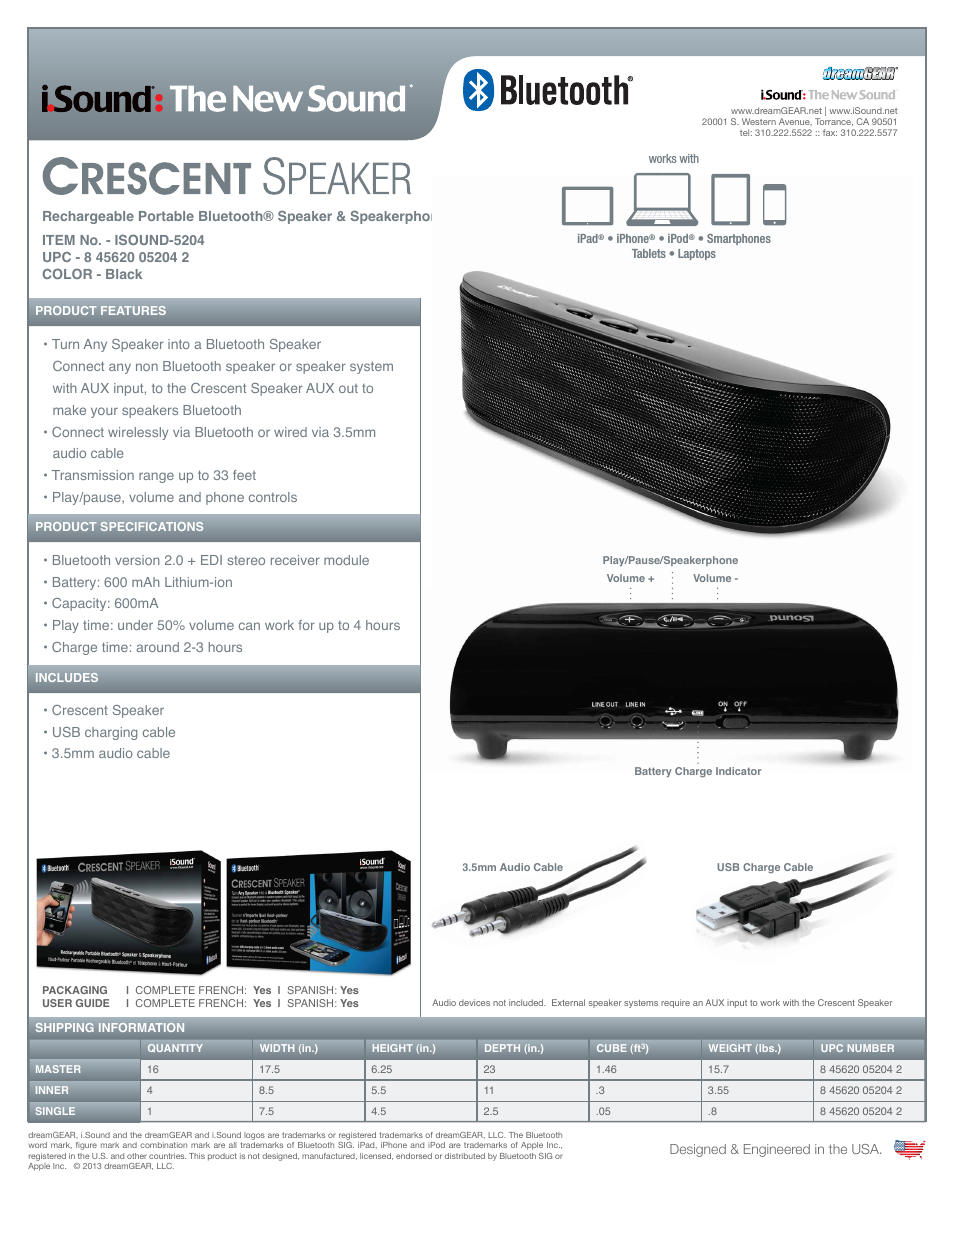 Crescent Rechargeable Portable Bluetooth Speaker + Speakerphone - Sell Sheet